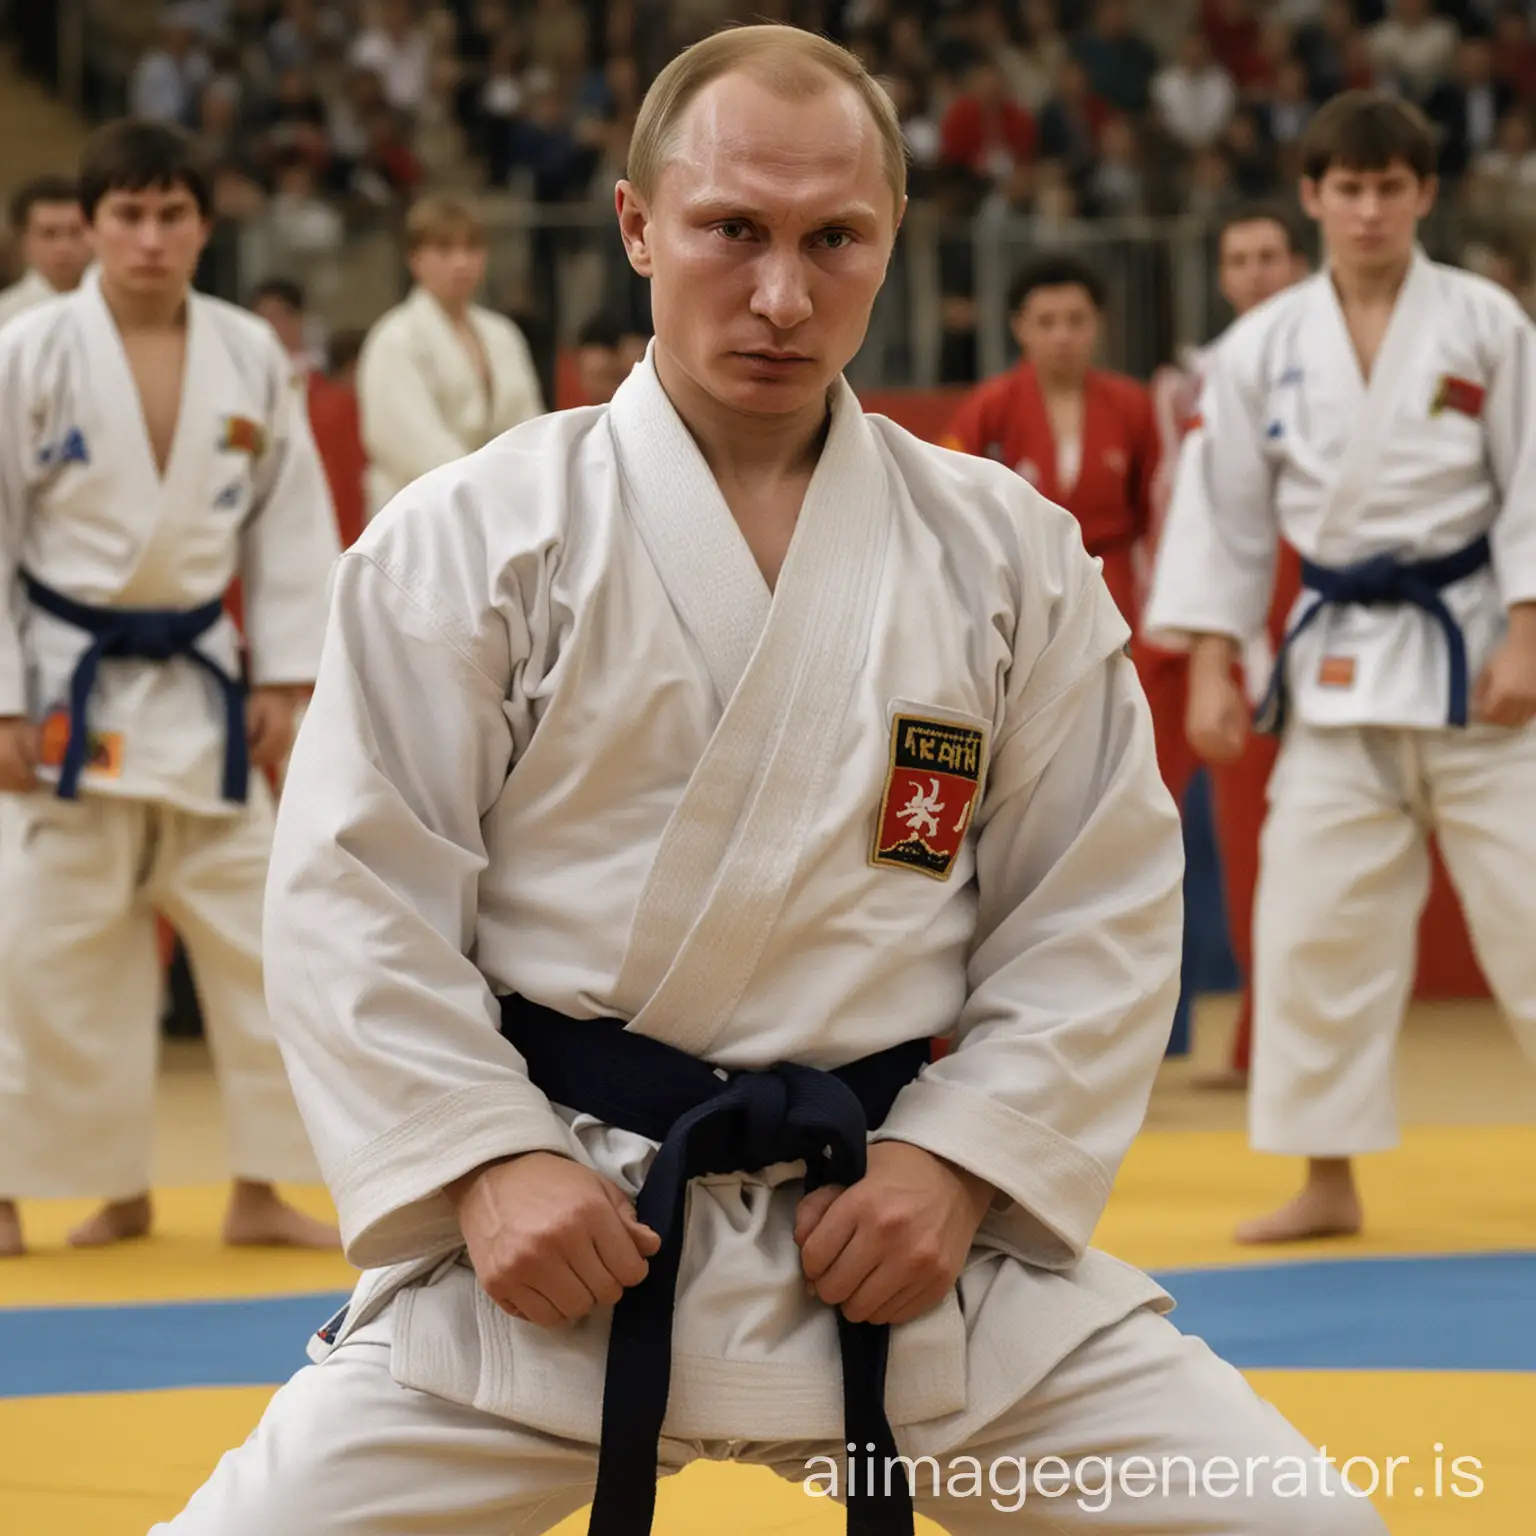 Image Prompt: A teenage Vladimir Putin in a judo uniform, engaged in a match, showing determination and focus.